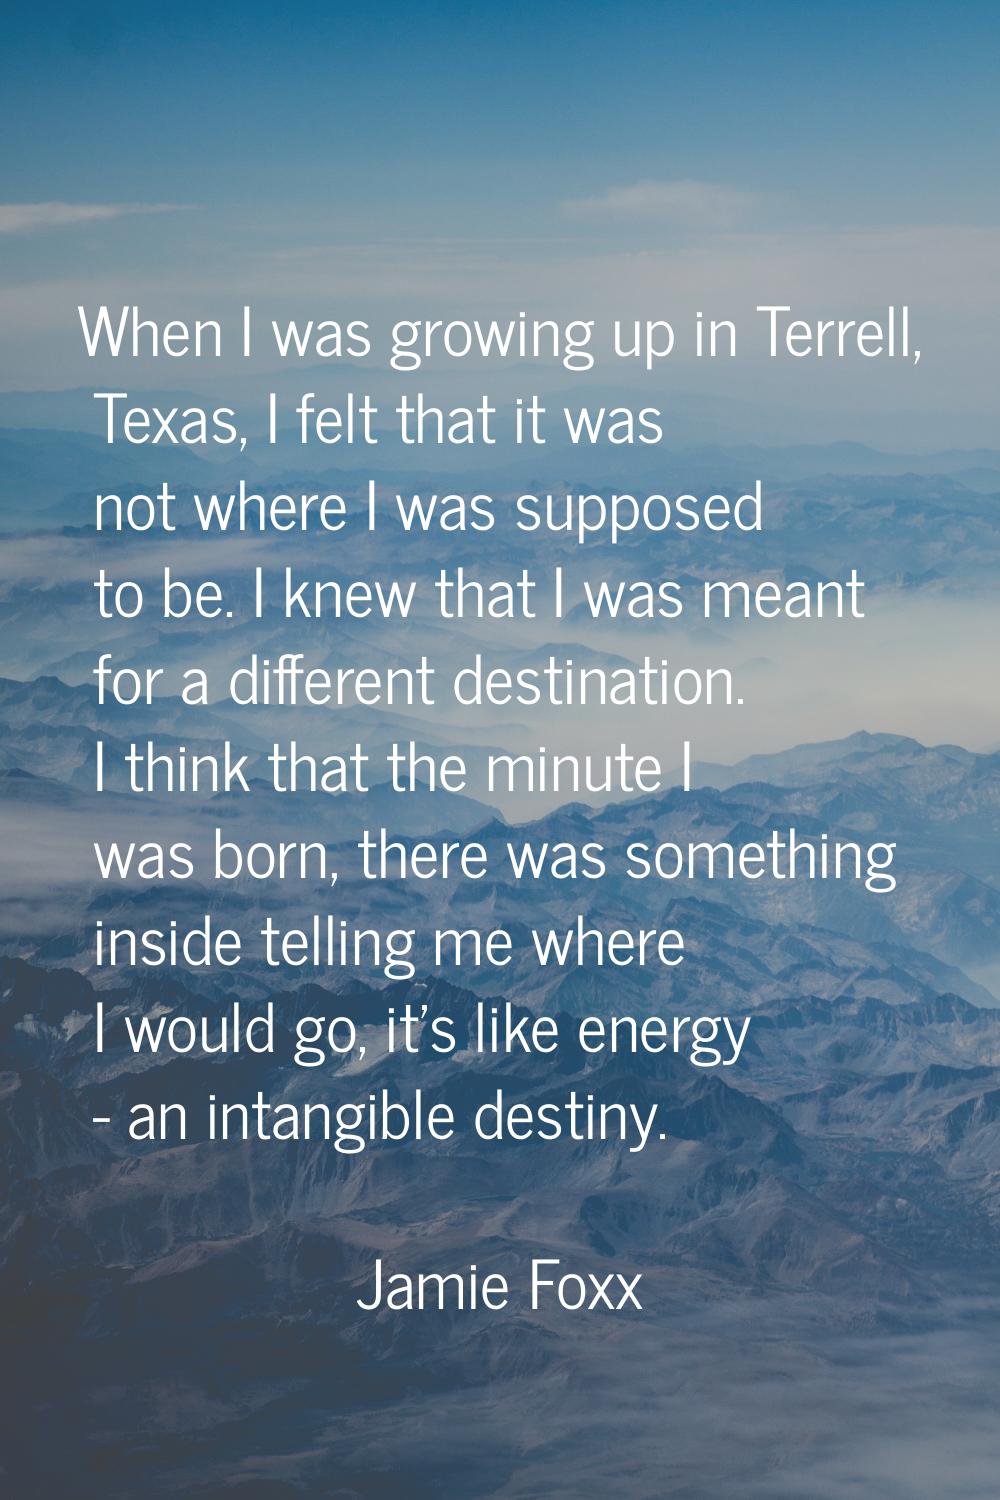 When I was growing up in Terrell, Texas, I felt that it was not where I was supposed to be. I knew 